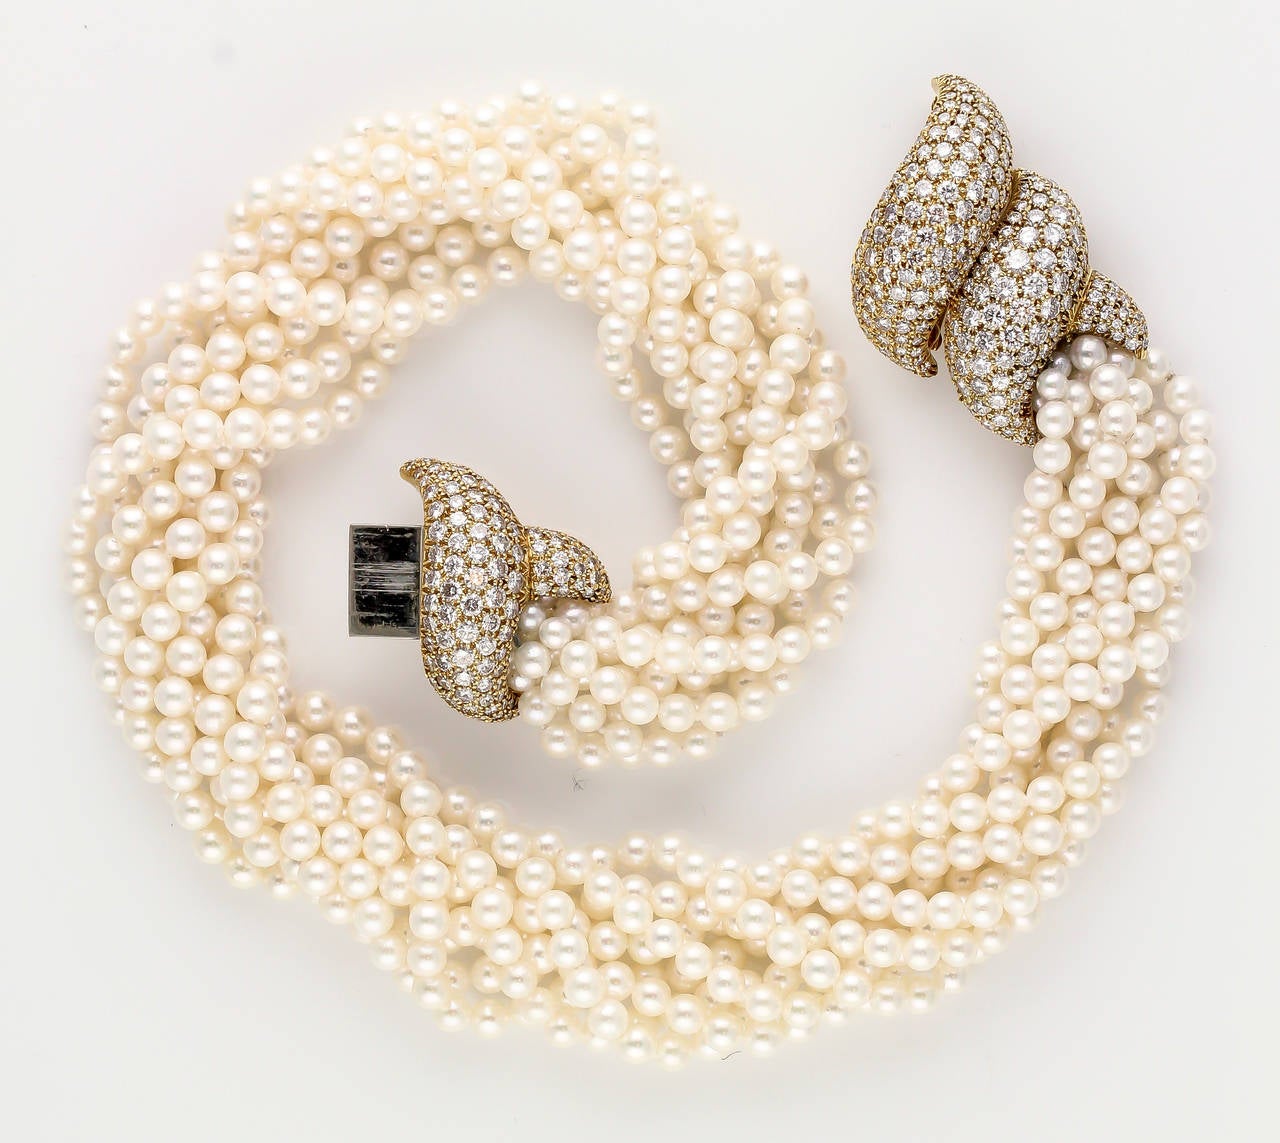 Chic and interesting choker necklace by Harry Winston. It is known as the 